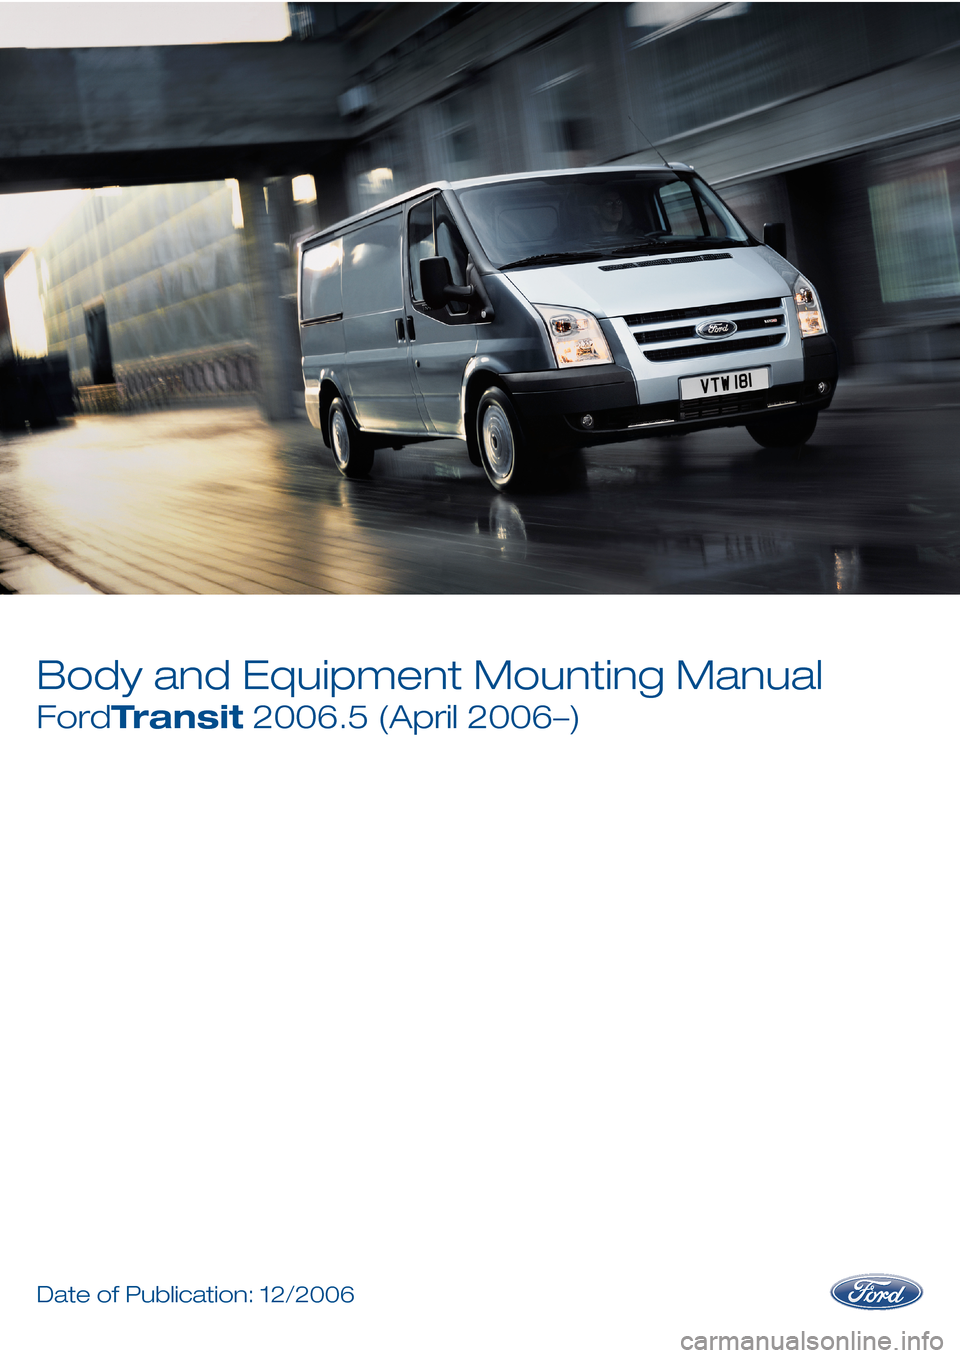 FORD TRANSIT 2006 7.G Body And Equipment Mounting Section Manual Body and Equipment Mounting Manual
FordTransit 2006.5 (April 2006–)
DateofPublication:12/2006  